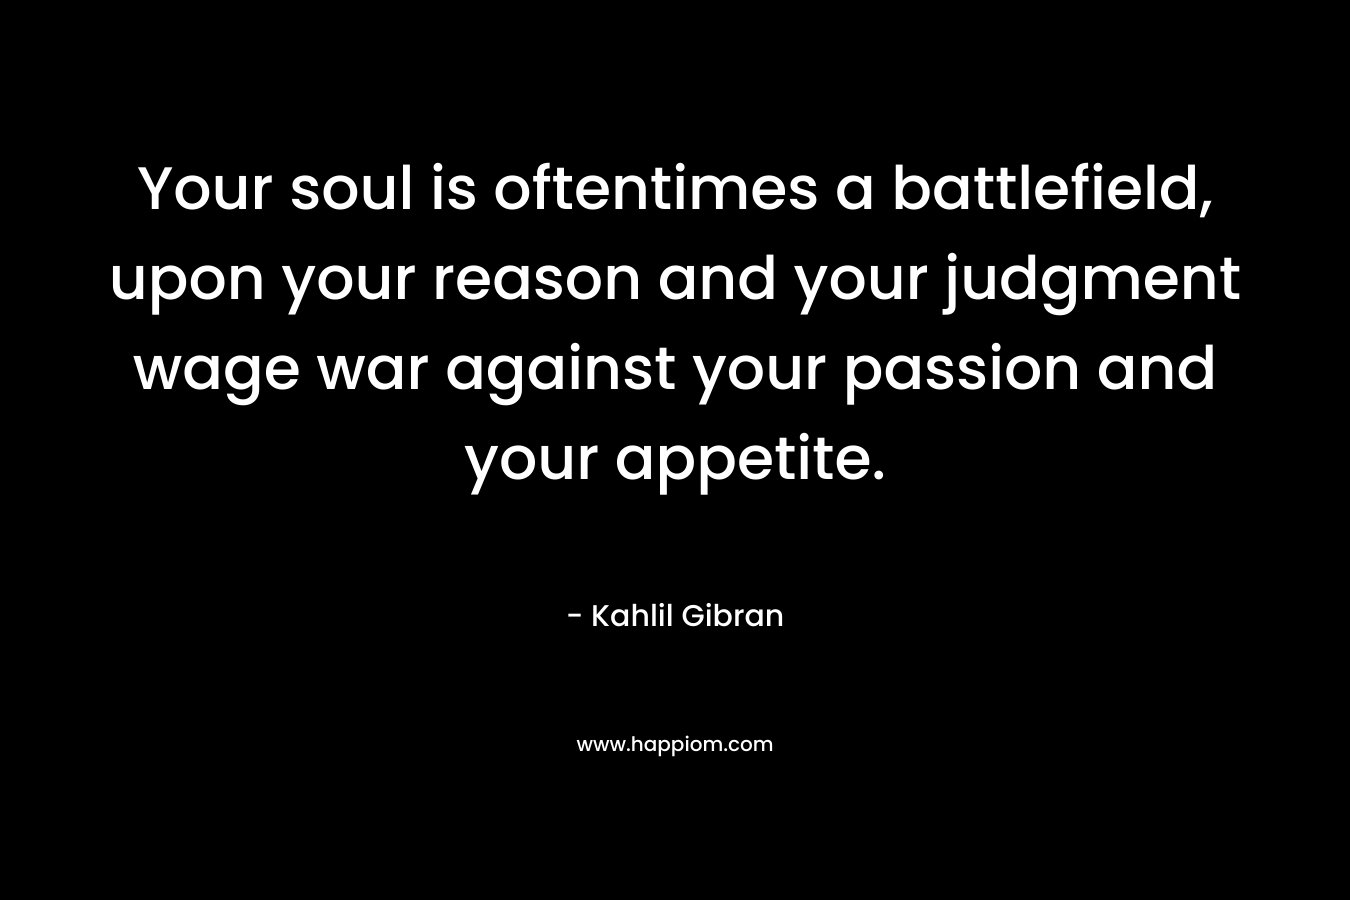 Your soul is oftentimes a battlefield, upon your reason and your judgment wage war against your passion and your appetite.